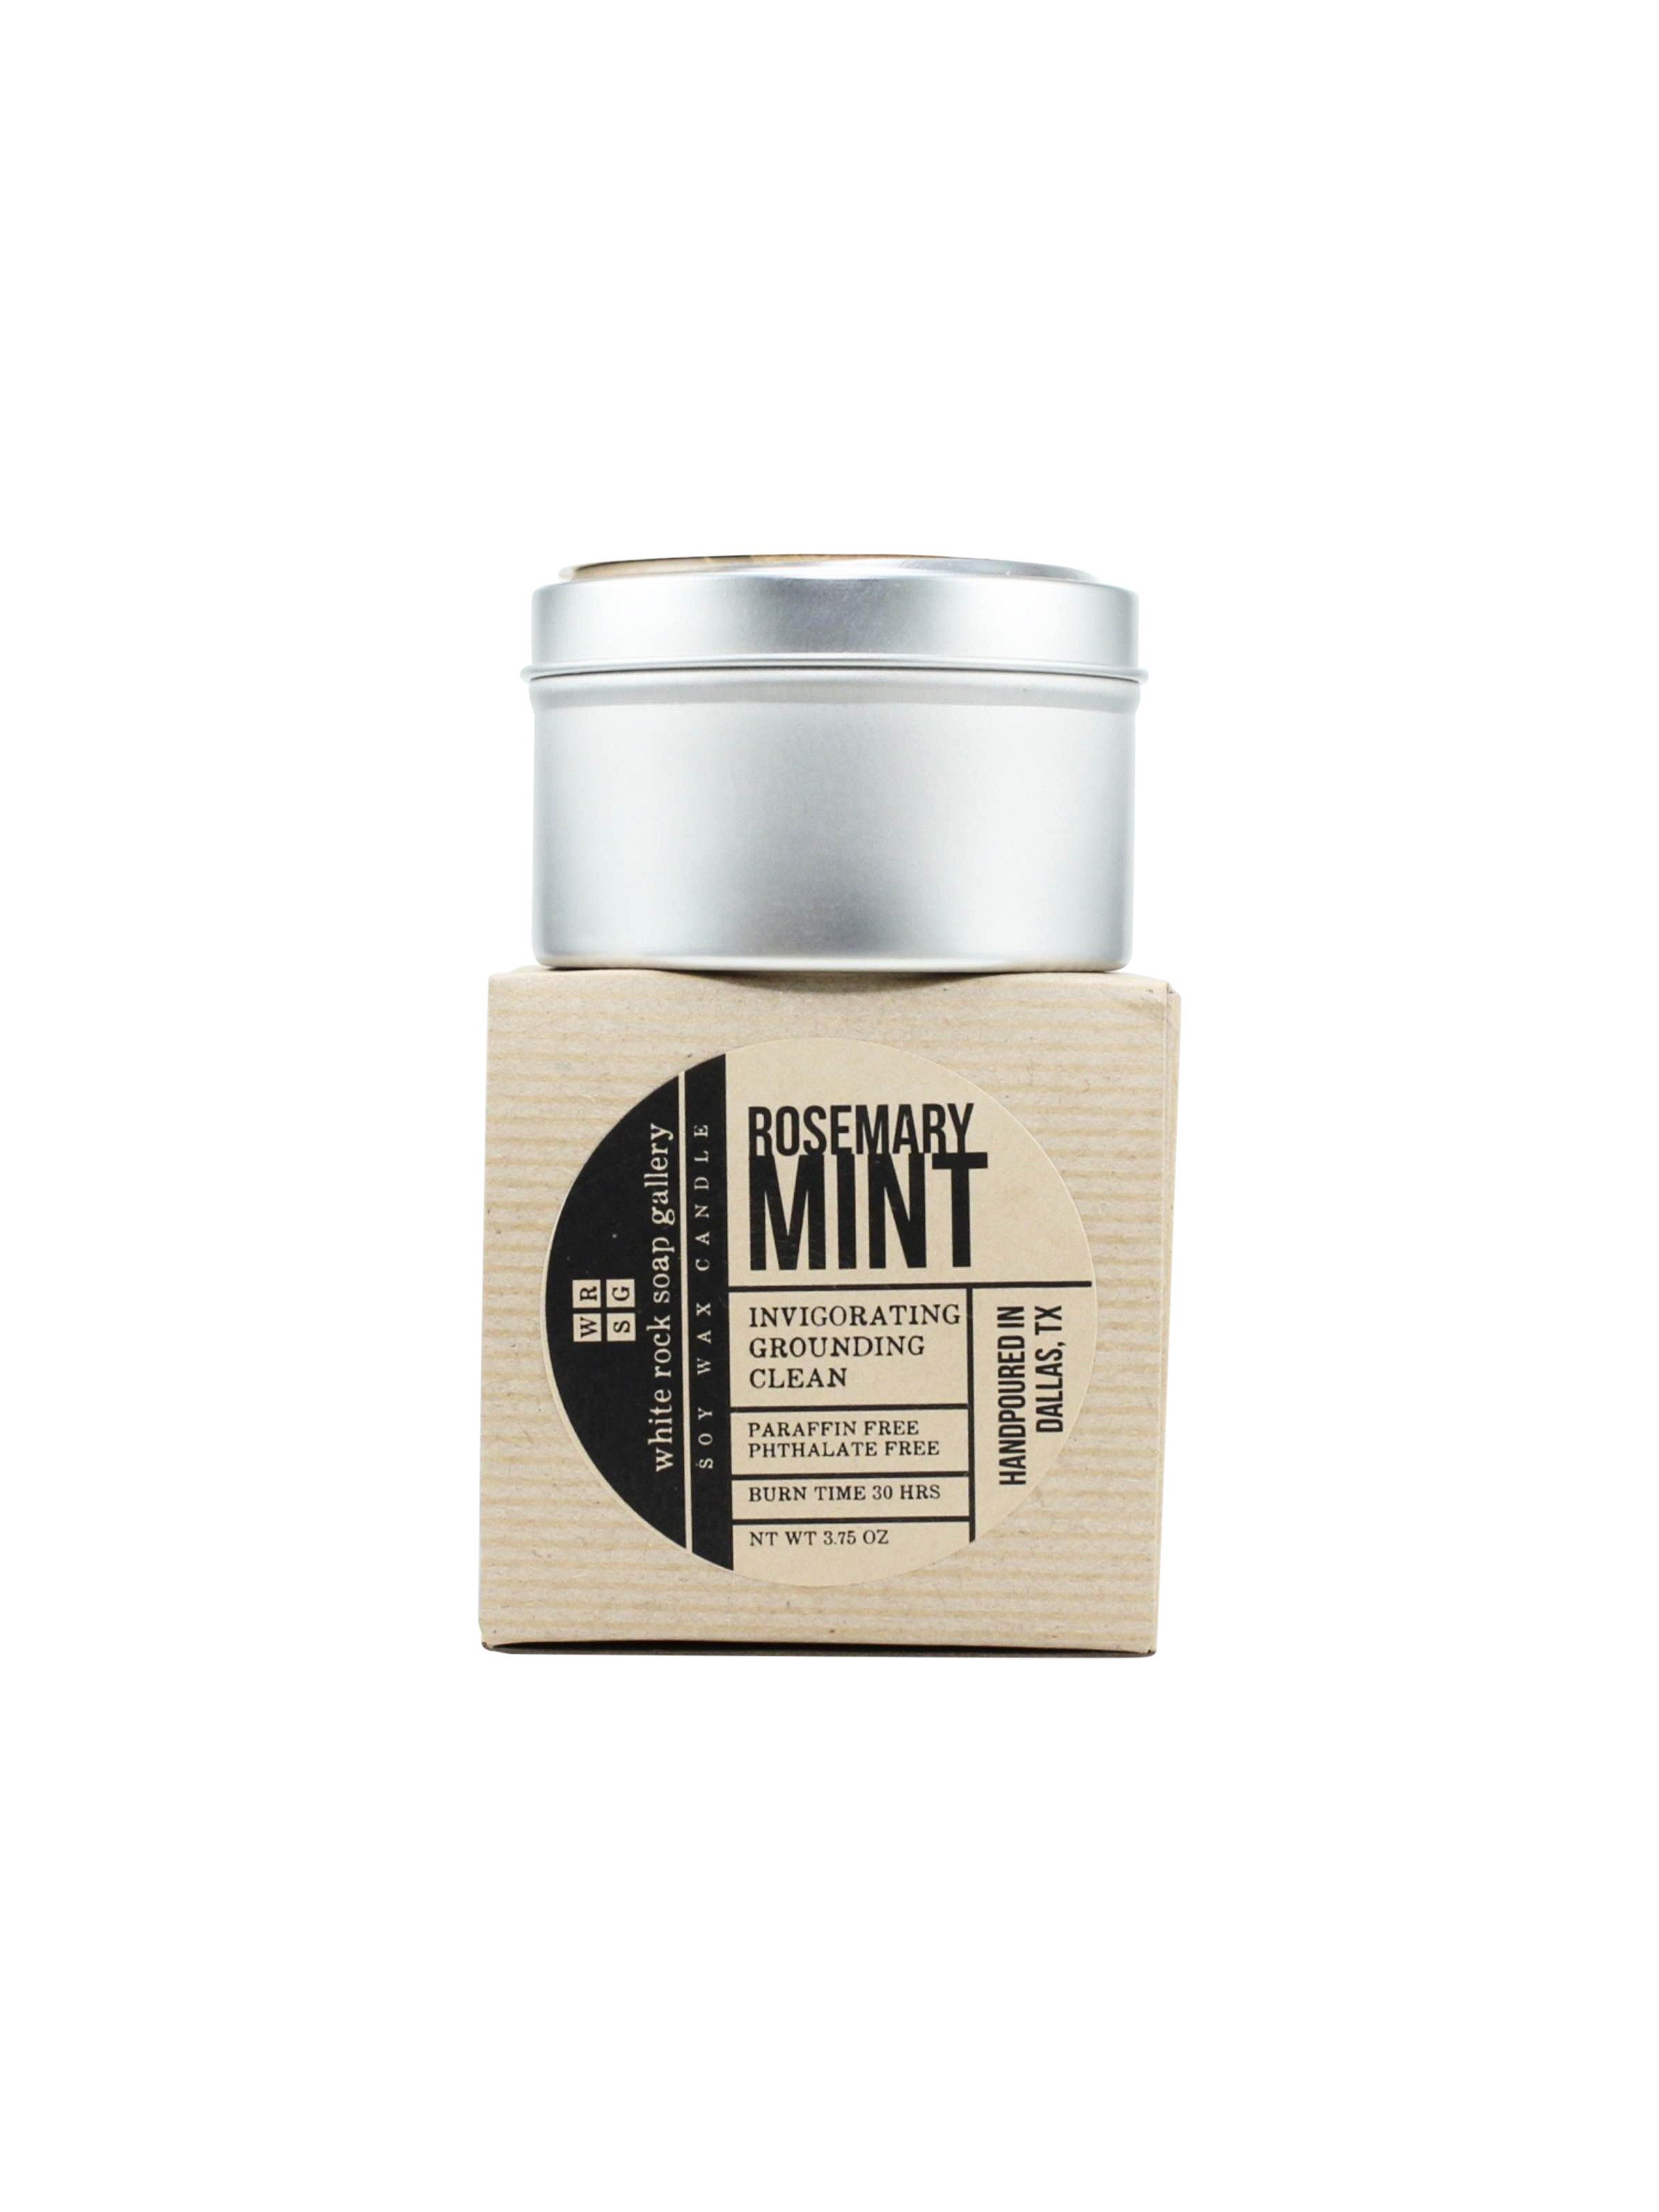 Tin Soy Wax Candle